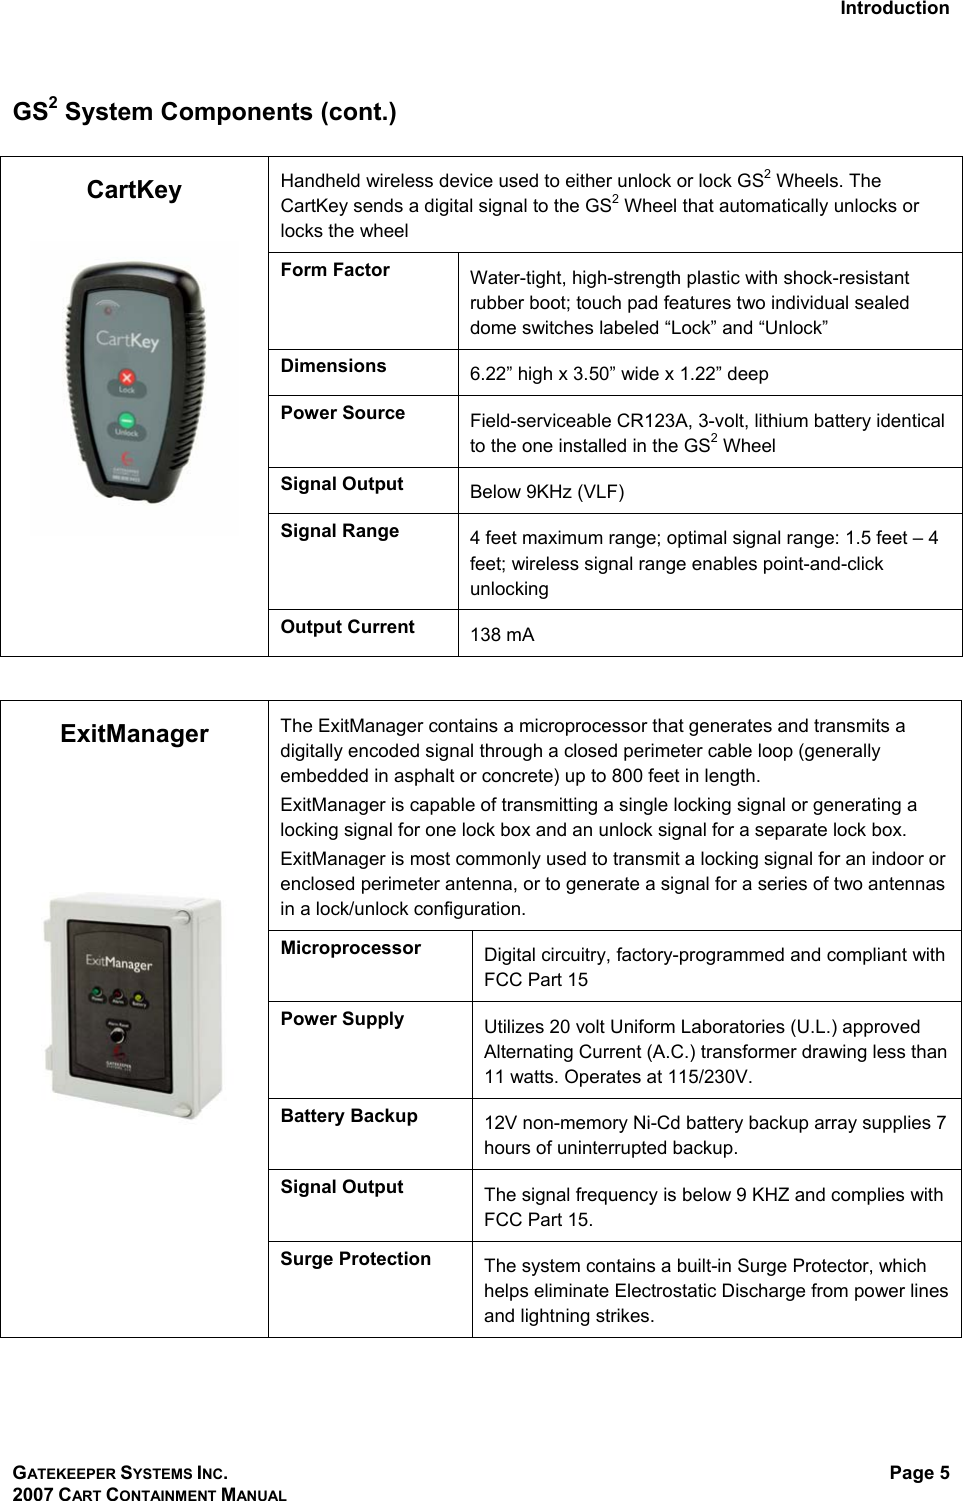 Introduction GATEKEEPER SYSTEMS INC. 2007 CART CONTAINMENT MANUAL Page 5  GS2 System Components (cont.)  Handheld wireless device used to either unlock or lock GS2 Wheels. The CartKey sends a digital signal to the GS2 Wheel that automatically unlocks or locks the wheel Form Factor  Water-tight, high-strength plastic with shock-resistant rubber boot; touch pad features two individual sealed dome switches labeled “Lock” and “Unlock” Dimensions  6.22” high x 3.50” wide x 1.22” deep Power Source  Field-serviceable CR123A, 3-volt, lithium battery identical to the one installed in the GS2 Wheel Signal Output  Below 9KHz (VLF) Signal Range  4 feet maximum range; optimal signal range: 1.5 feet – 4 feet; wireless signal range enables point-and-click unlocking CartKey   Output Current  138 mA   The ExitManager contains a microprocessor that generates and transmits a digitally encoded signal through a closed perimeter cable loop (generally embedded in asphalt or concrete) up to 800 feet in length.  ExitManager is capable of transmitting a single locking signal or generating a locking signal for one lock box and an unlock signal for a separate lock box. ExitManager is most commonly used to transmit a locking signal for an indoor or enclosed perimeter antenna, or to generate a signal for a series of two antennas in a lock/unlock configuration. Microprocessor  Digital circuitry, factory-programmed and compliant with FCC Part 15 Power Supply  Utilizes 20 volt Uniform Laboratories (U.L.) approved Alternating Current (A.C.) transformer drawing less than 11 watts. Operates at 115/230V. Battery Backup  12V non-memory Ni-Cd battery backup array supplies 7 hours of uninterrupted backup. Signal Output  The signal frequency is below 9 KHZ and complies with FCC Part 15.  ExitManager         Surge Protection  The system contains a built-in Surge Protector, which helps eliminate Electrostatic Discharge from power lines and lightning strikes.   